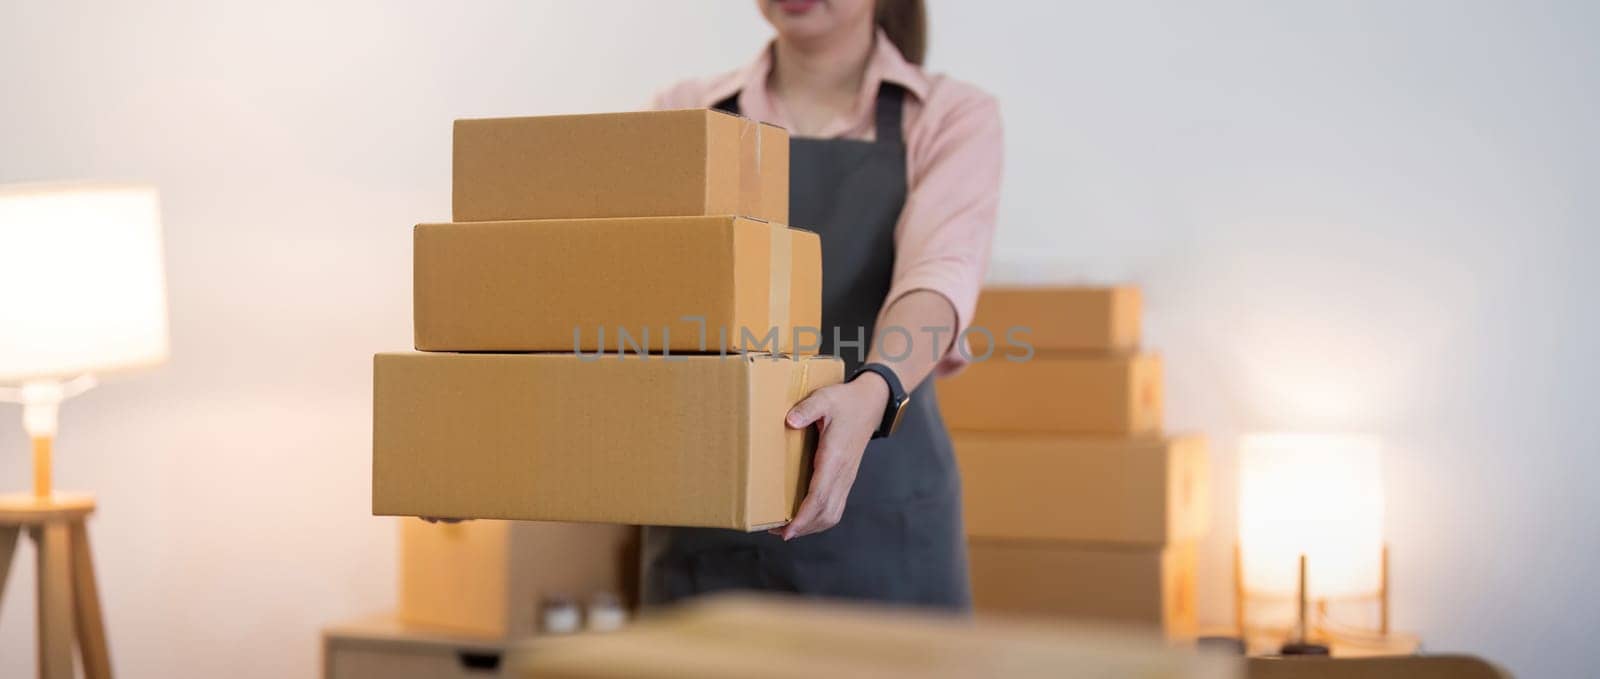 Asian woman entrepreneur prepare parcel box and check online order on laptop computer for commercial checking delivery. online marketing, packing box, SME seller. startup business concept by nateemee